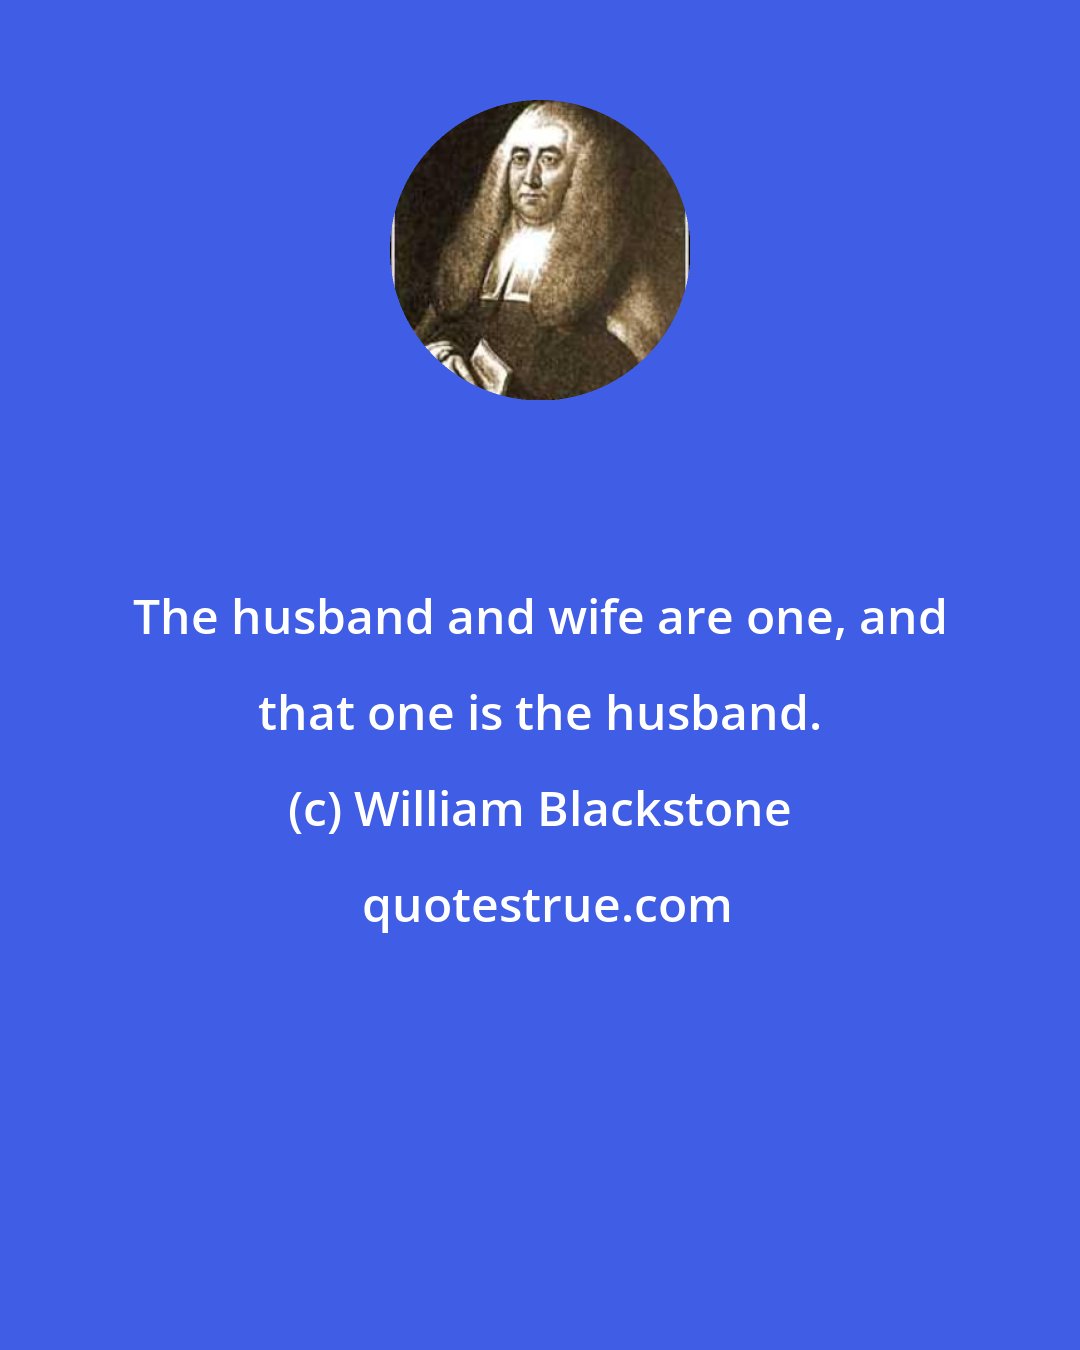 William Blackstone: The husband and wife are one, and that one is the husband.